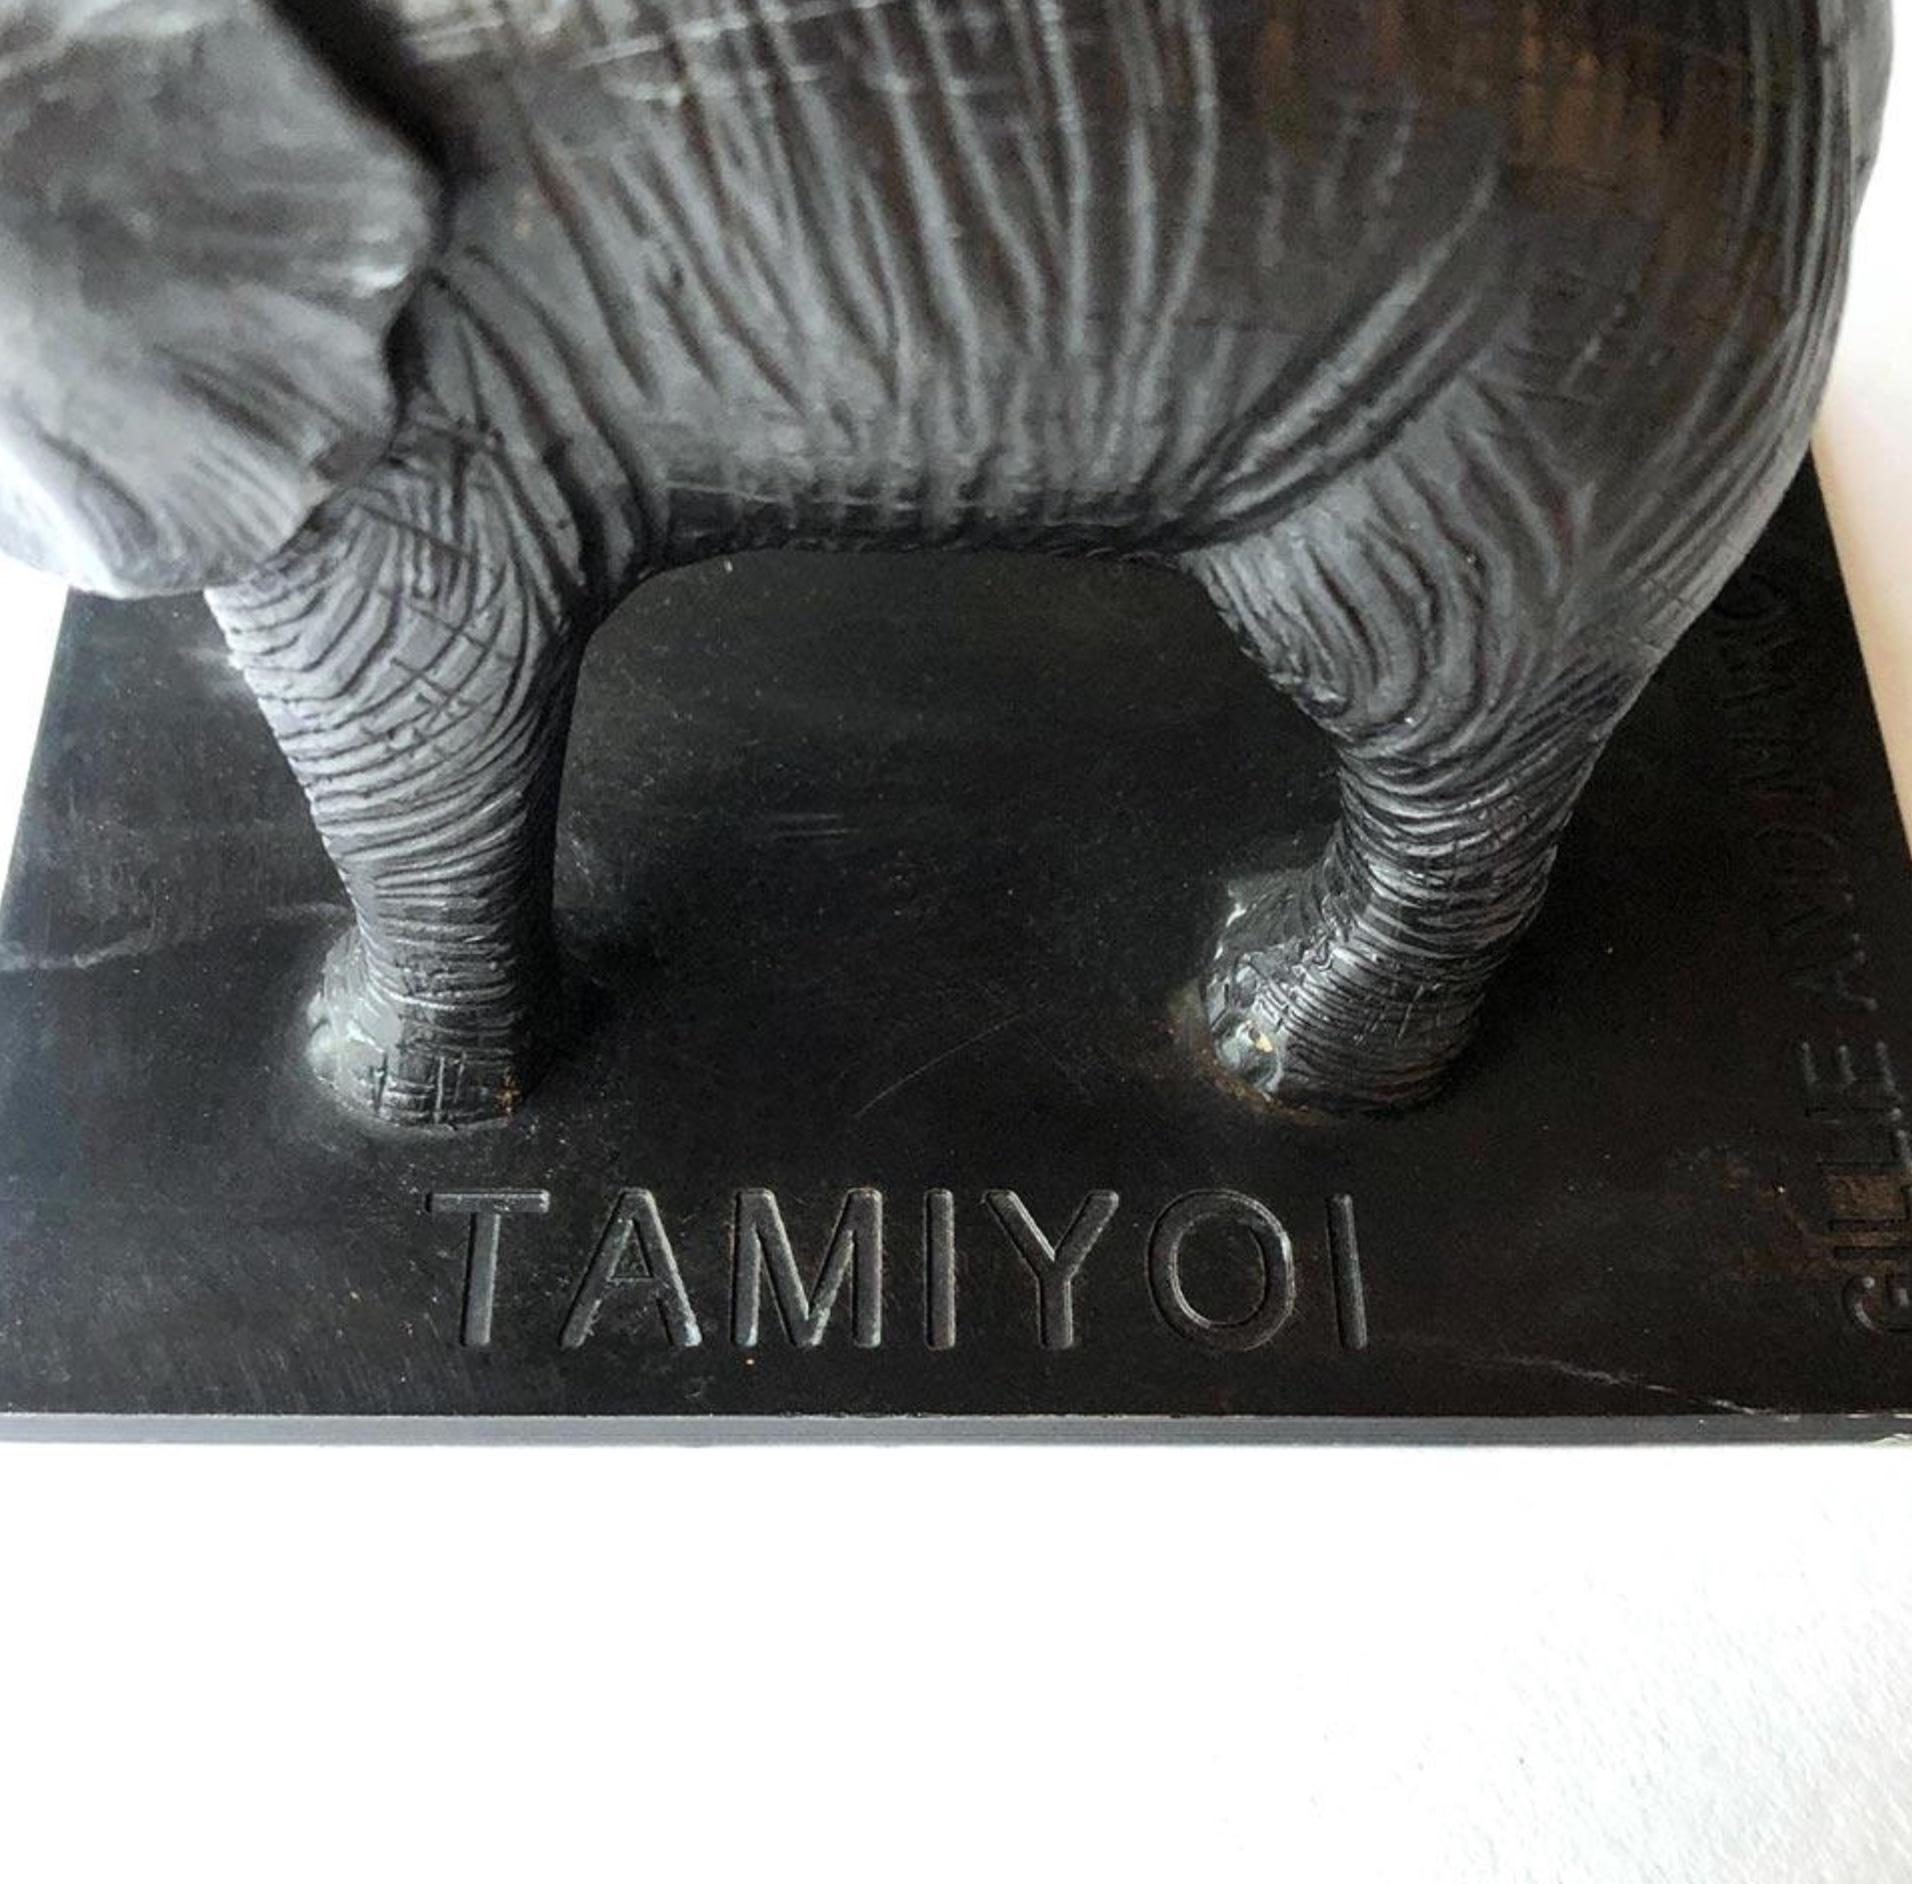 Authentic Bronze Orphan Tamiyoi Elephant Sculpture by Gillie and Marc For Sale 7